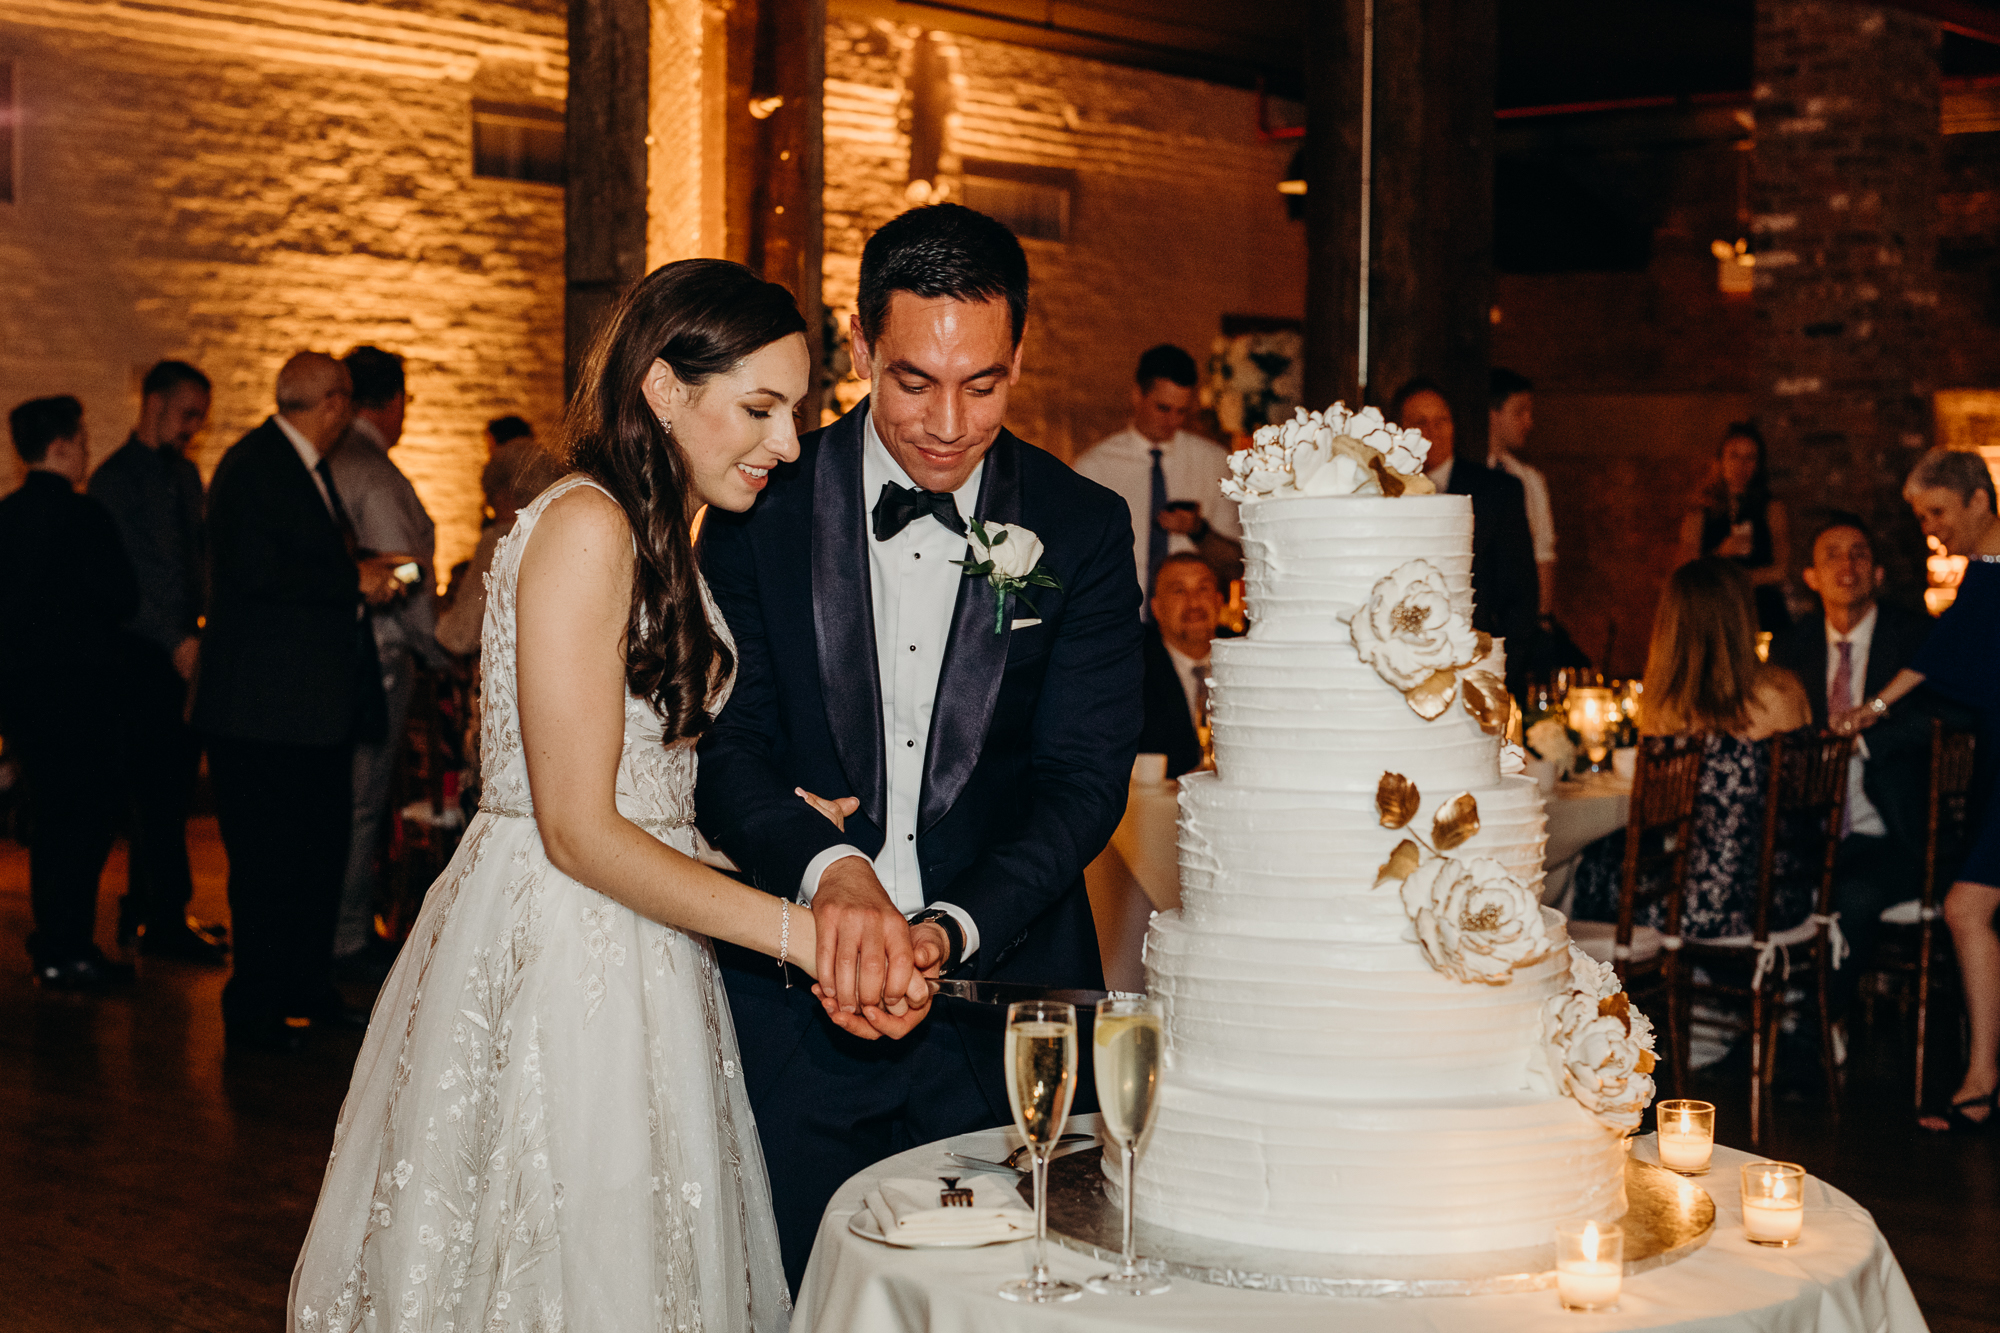 a bride and groom cut their wedding cake at liberty warehouse in brooklyn, new york city